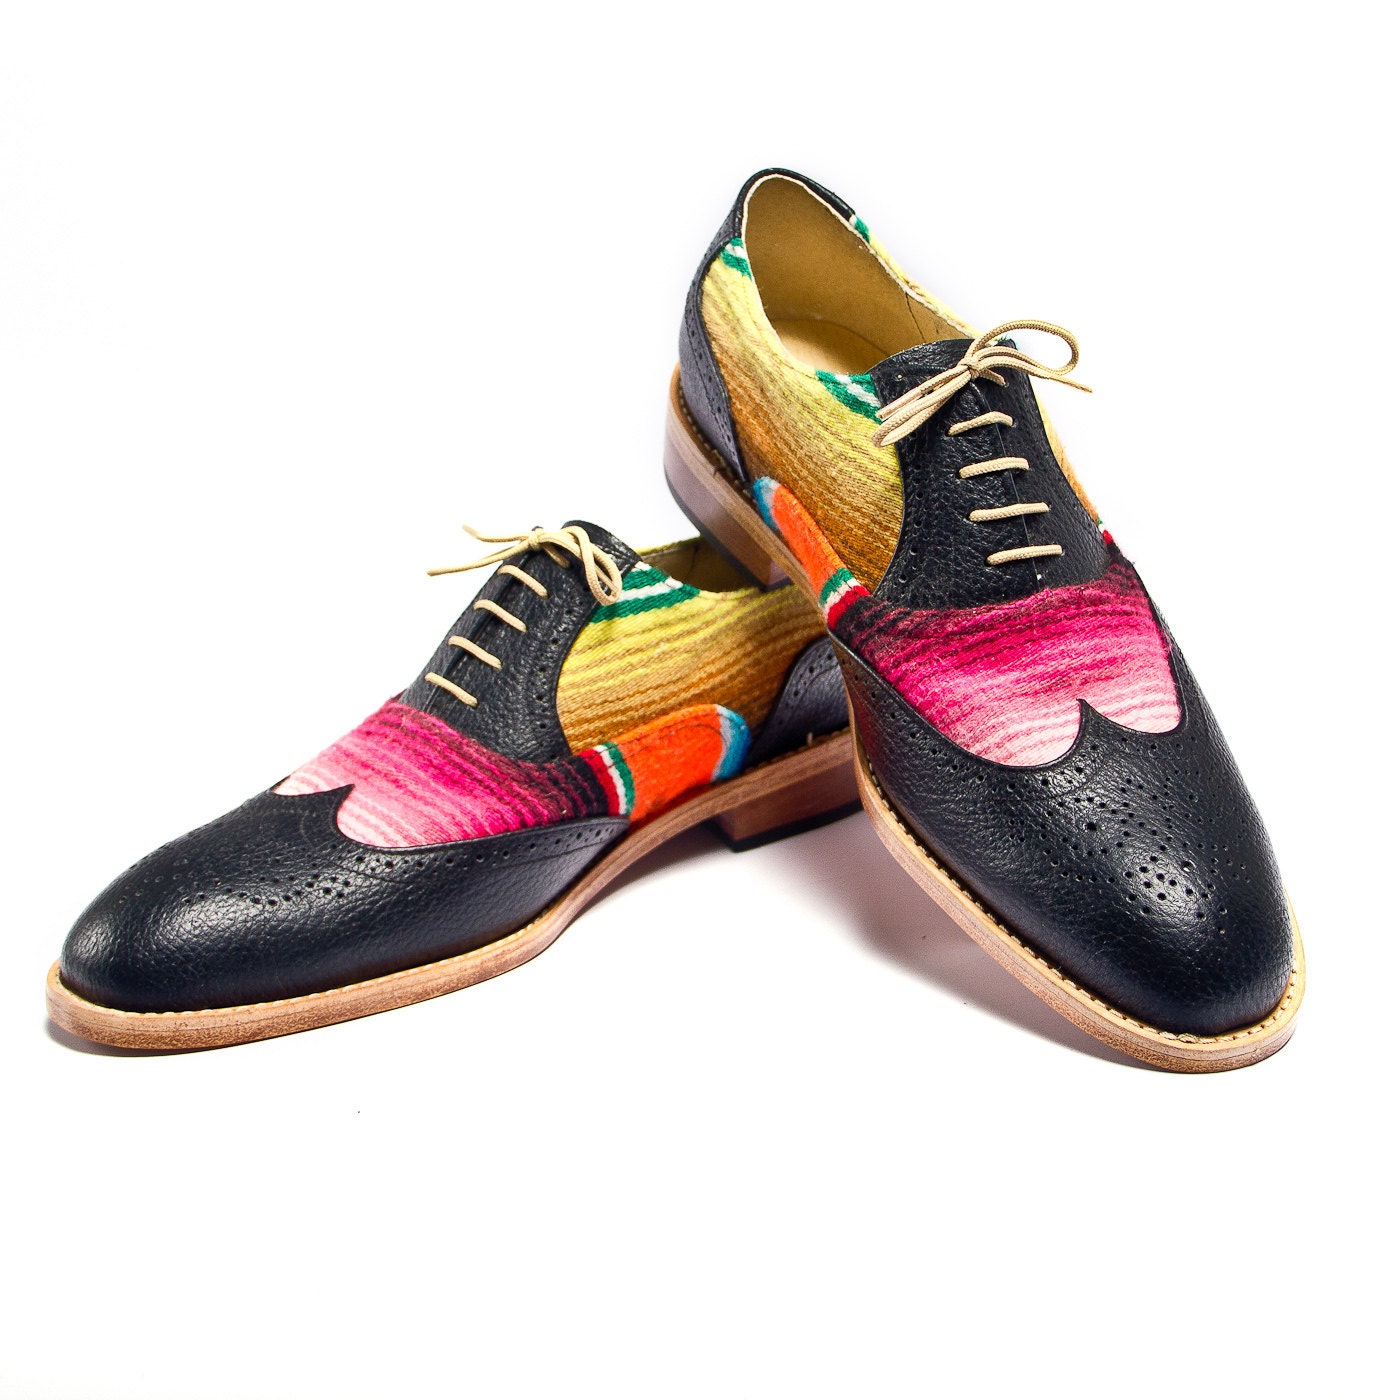 mexican blanket ( zarape ) and black brogues oxford shoes - FREE WORLDWIDE SHIPPING